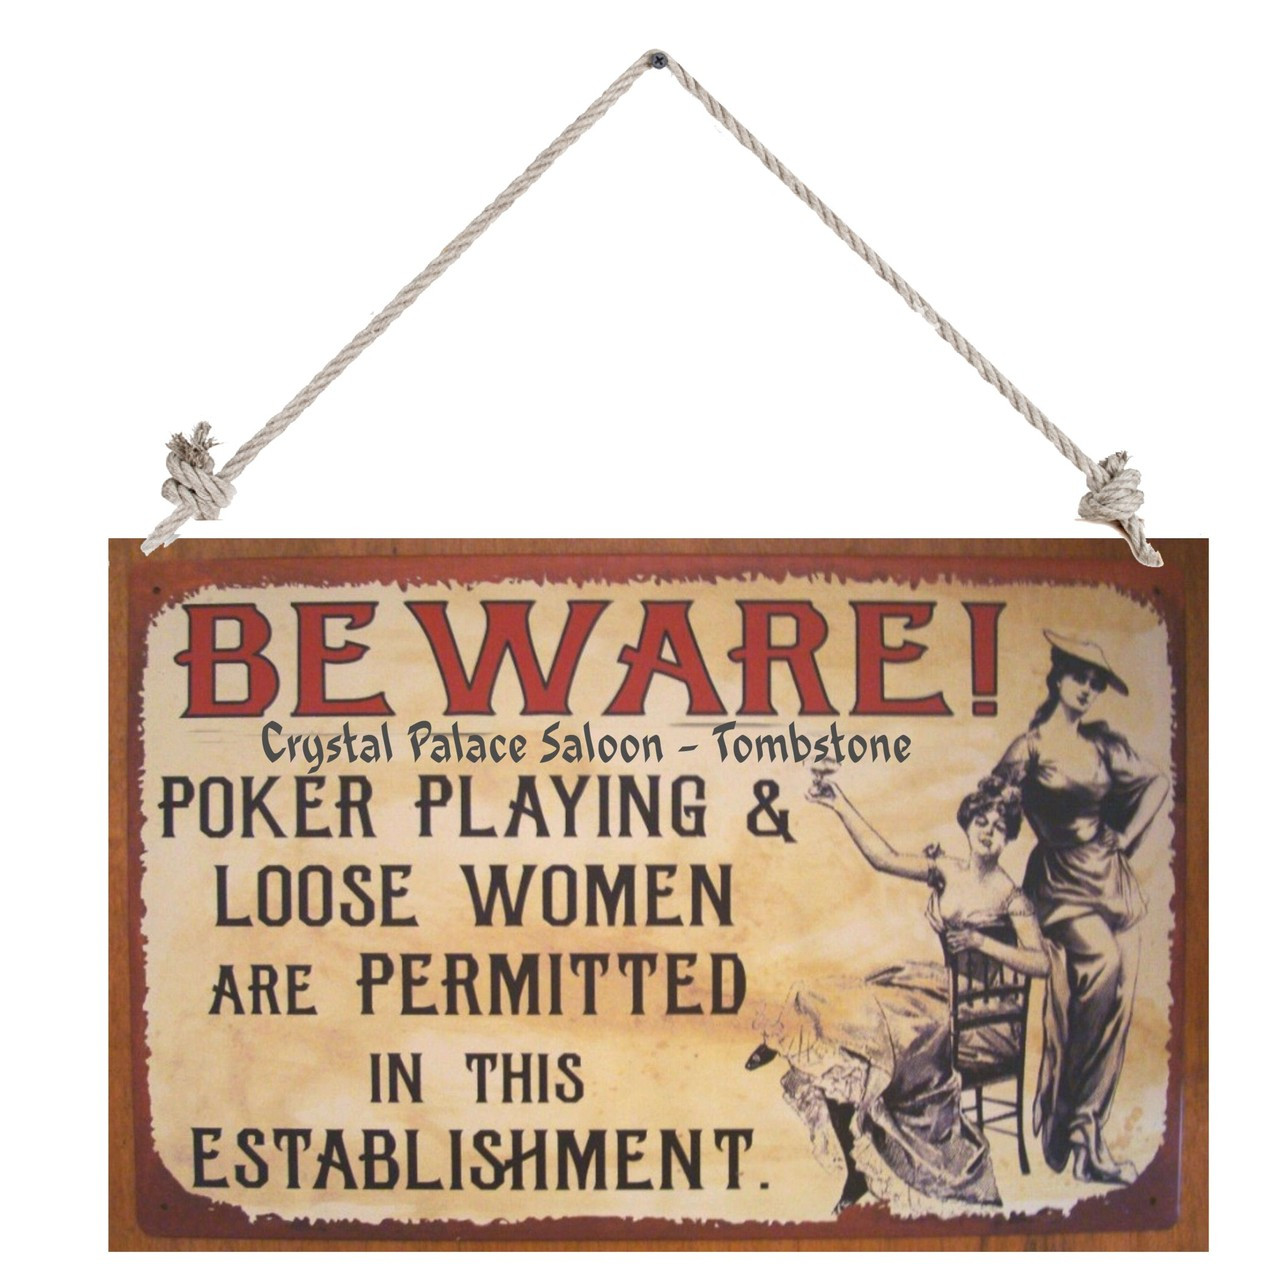 Beware Loose Women Poker Playing Crystal Palace Tombstone 12" X 18" wood sign